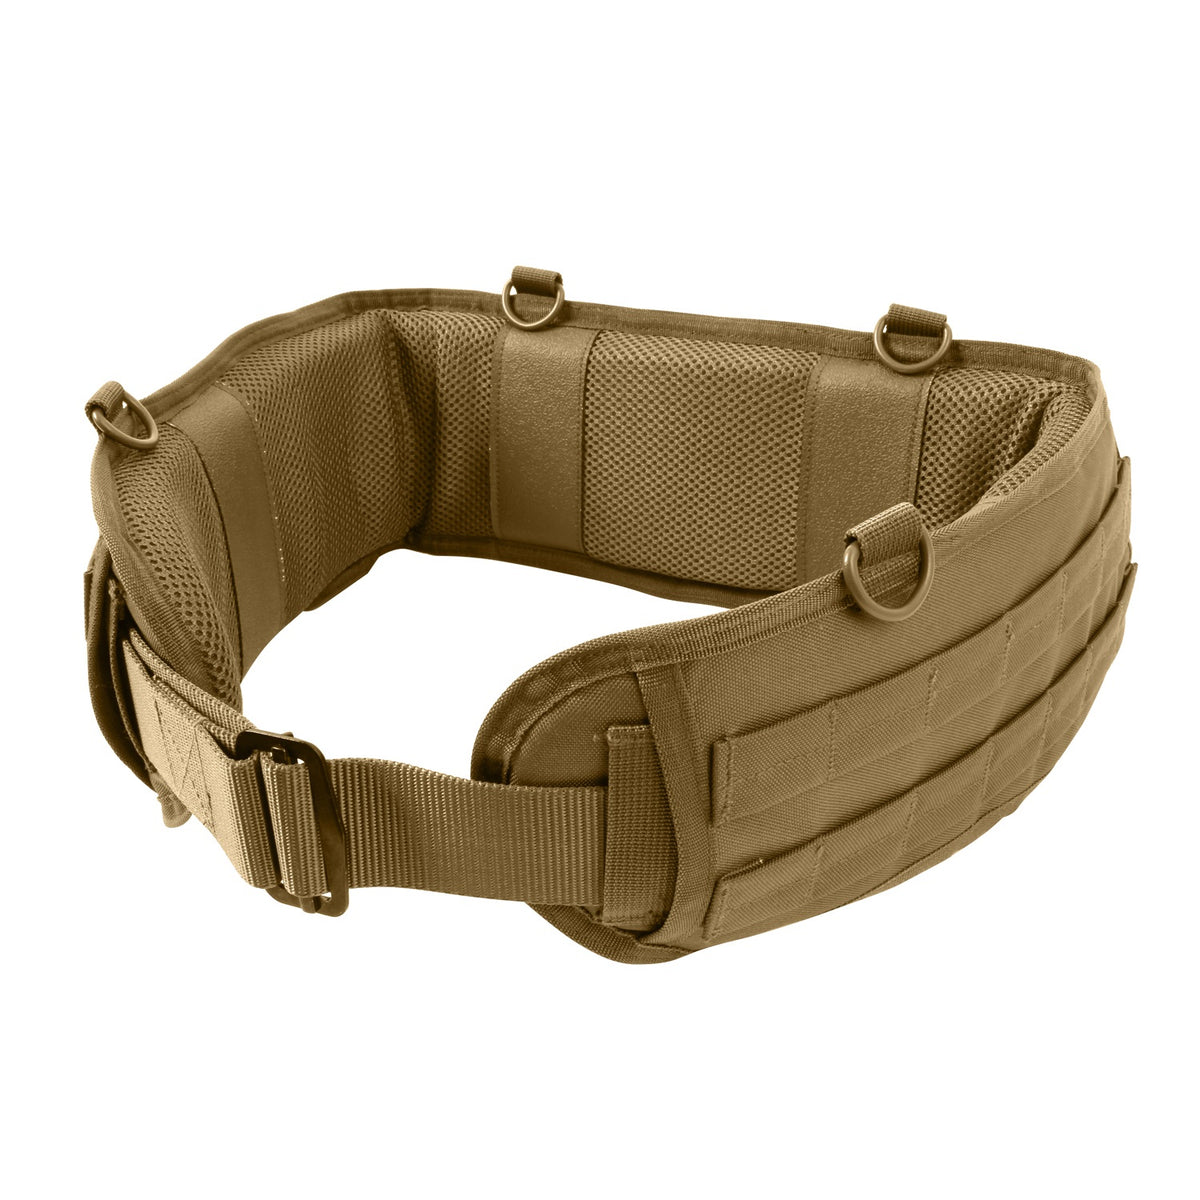 Rothco Tactical Battle Belt Coyote Brown